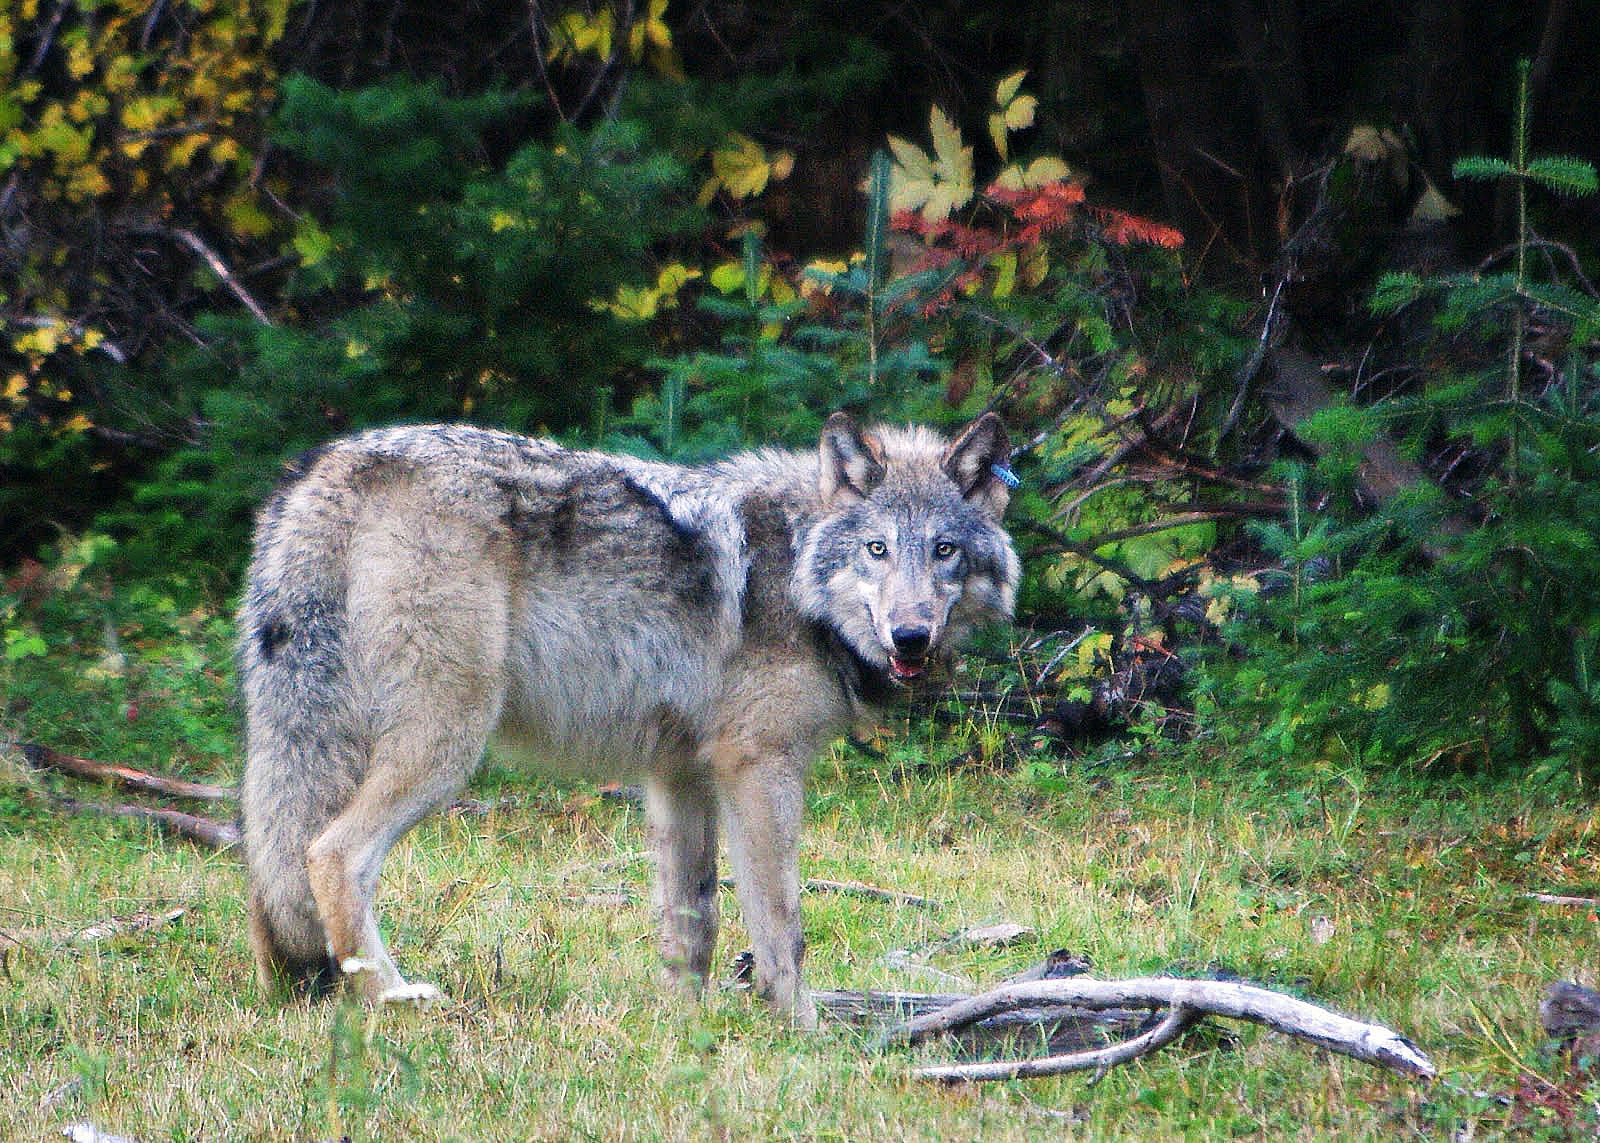 OR-10, a gray wolf.